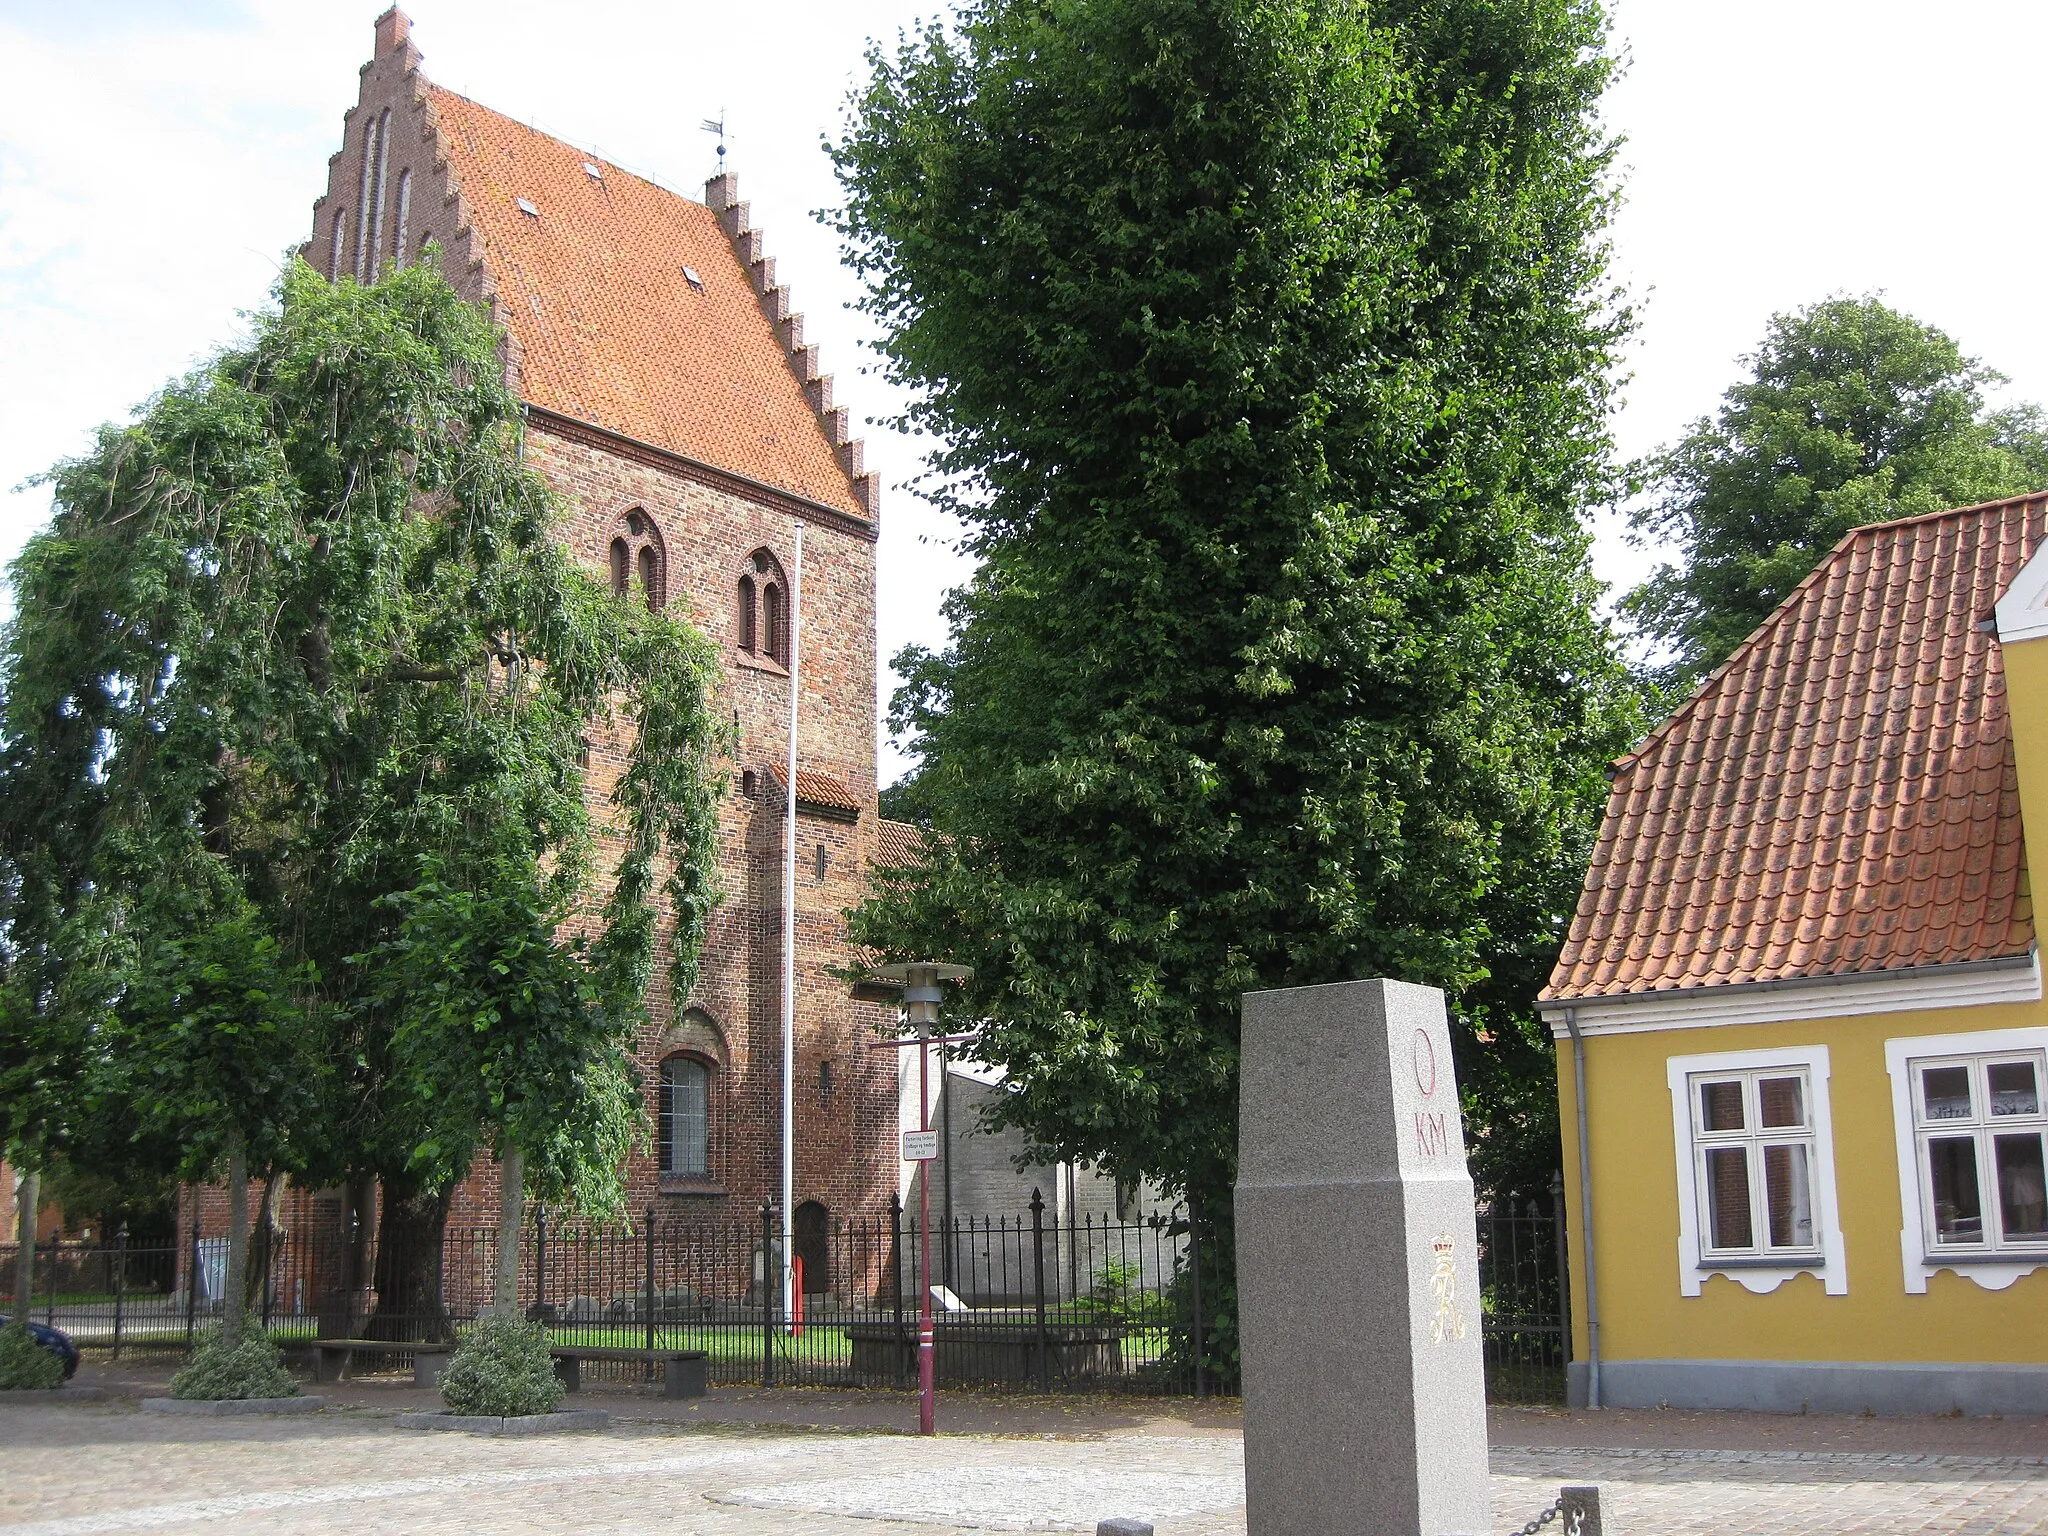 Photo showing: The church "Stubbekøbing Kirke" next to the square "Torvet" in the small town "Stubbekøbing". The town is located on the island Falster in east Denmark.